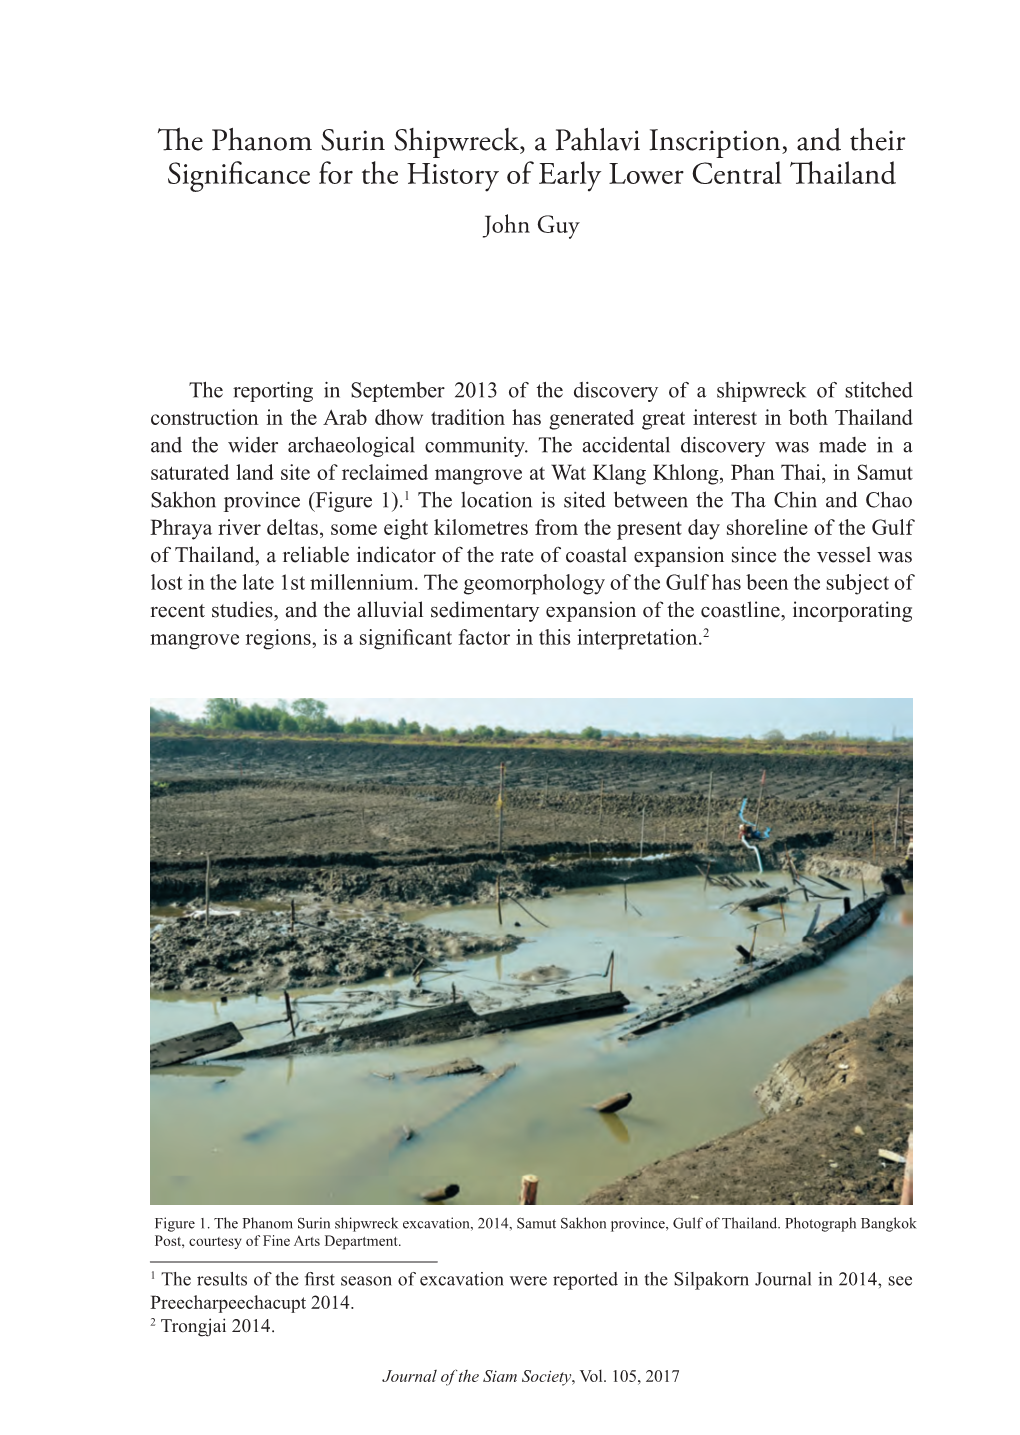 The Phanom Surin Shipwreck, a Pahlavi Inscription, and Their Significance for the History of Early Lower Central Thailand John Guy